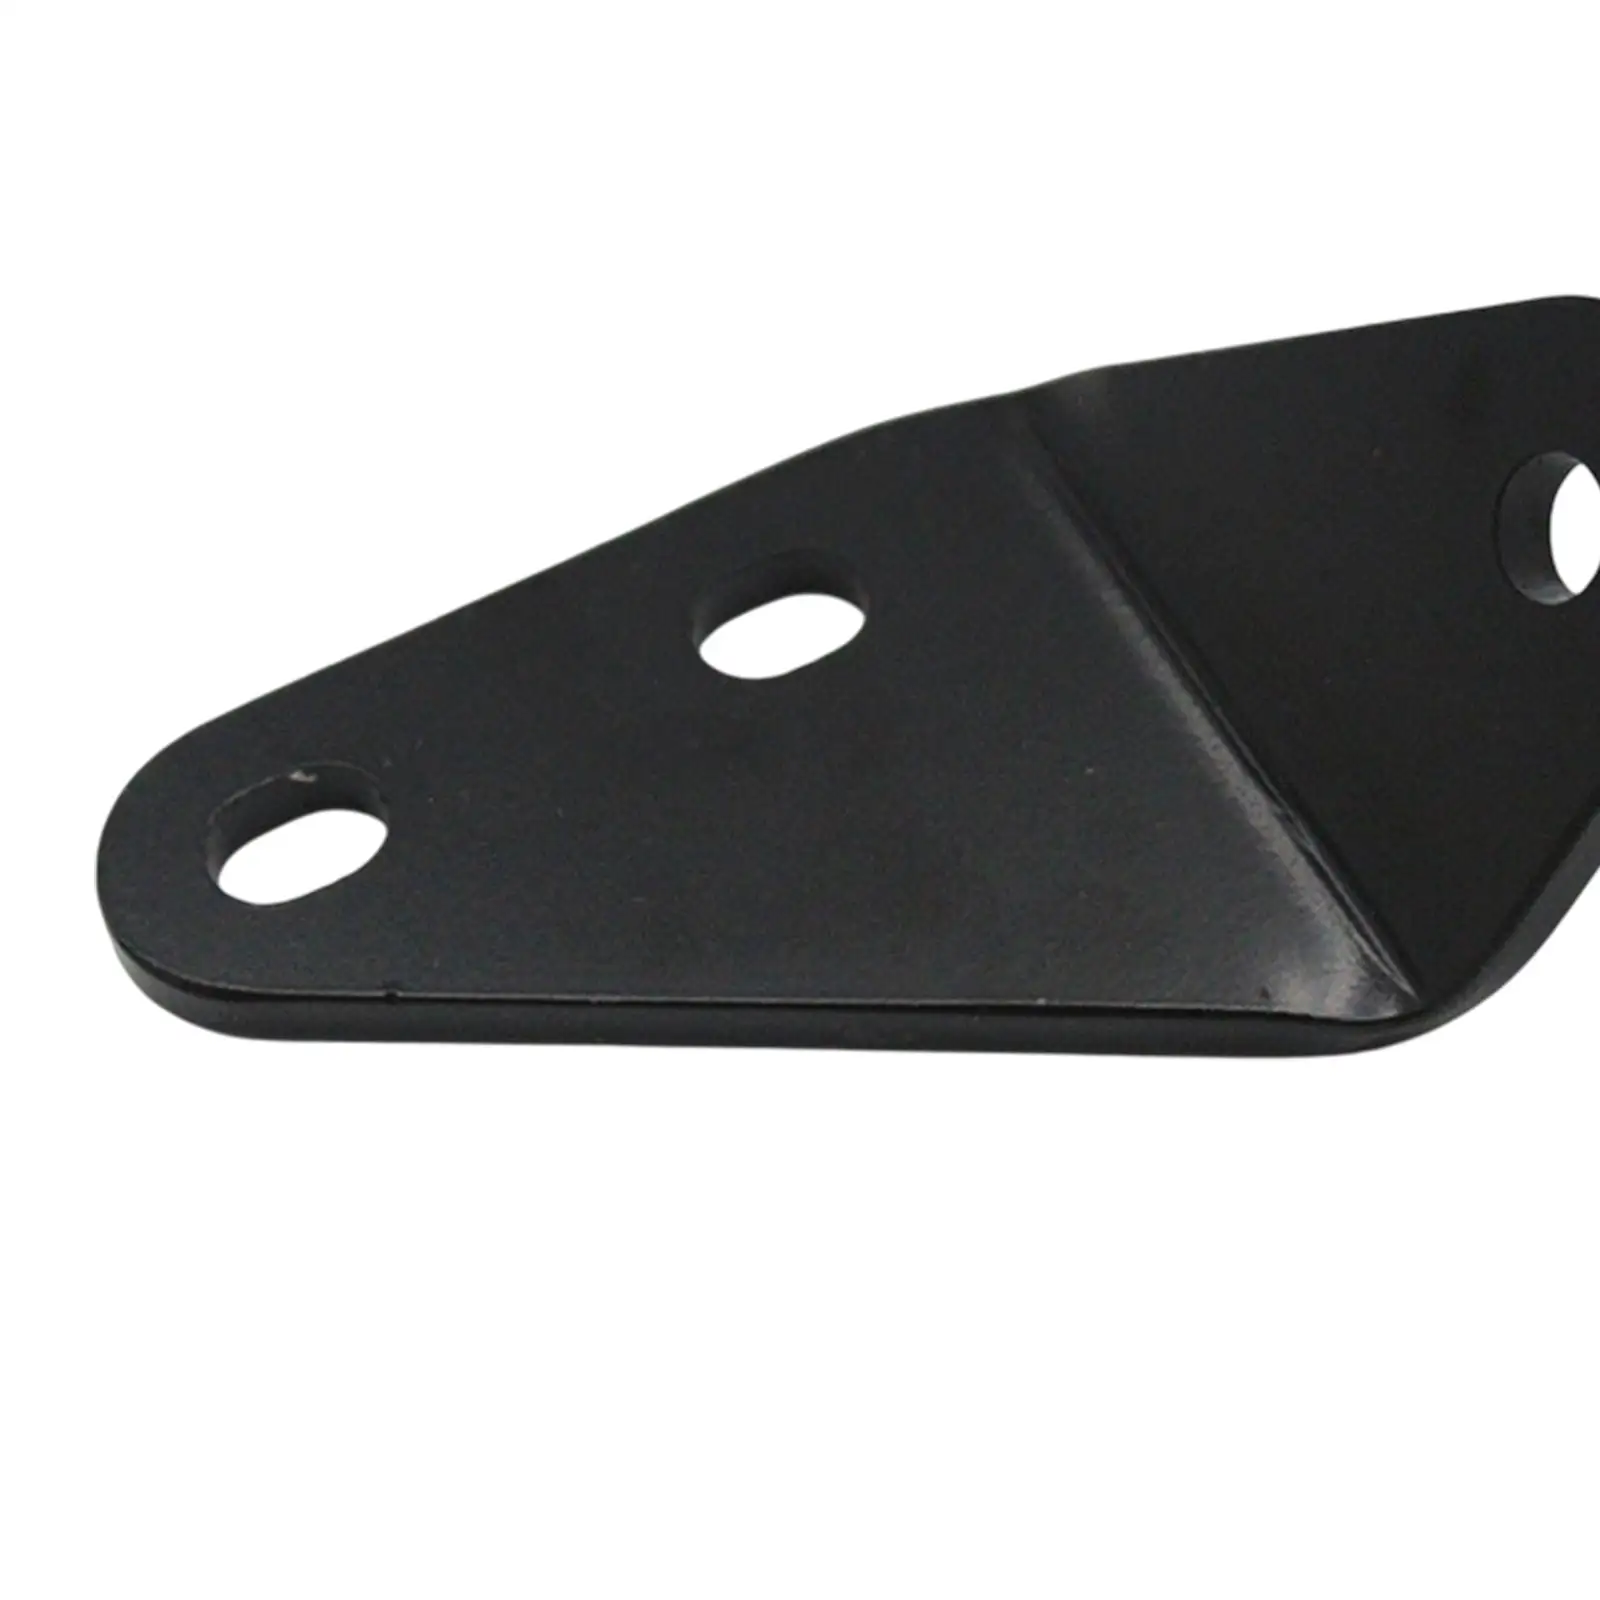 Clutch Pedal Repair Bracket Set Directly Replace Easy Installation Sturdy for T4